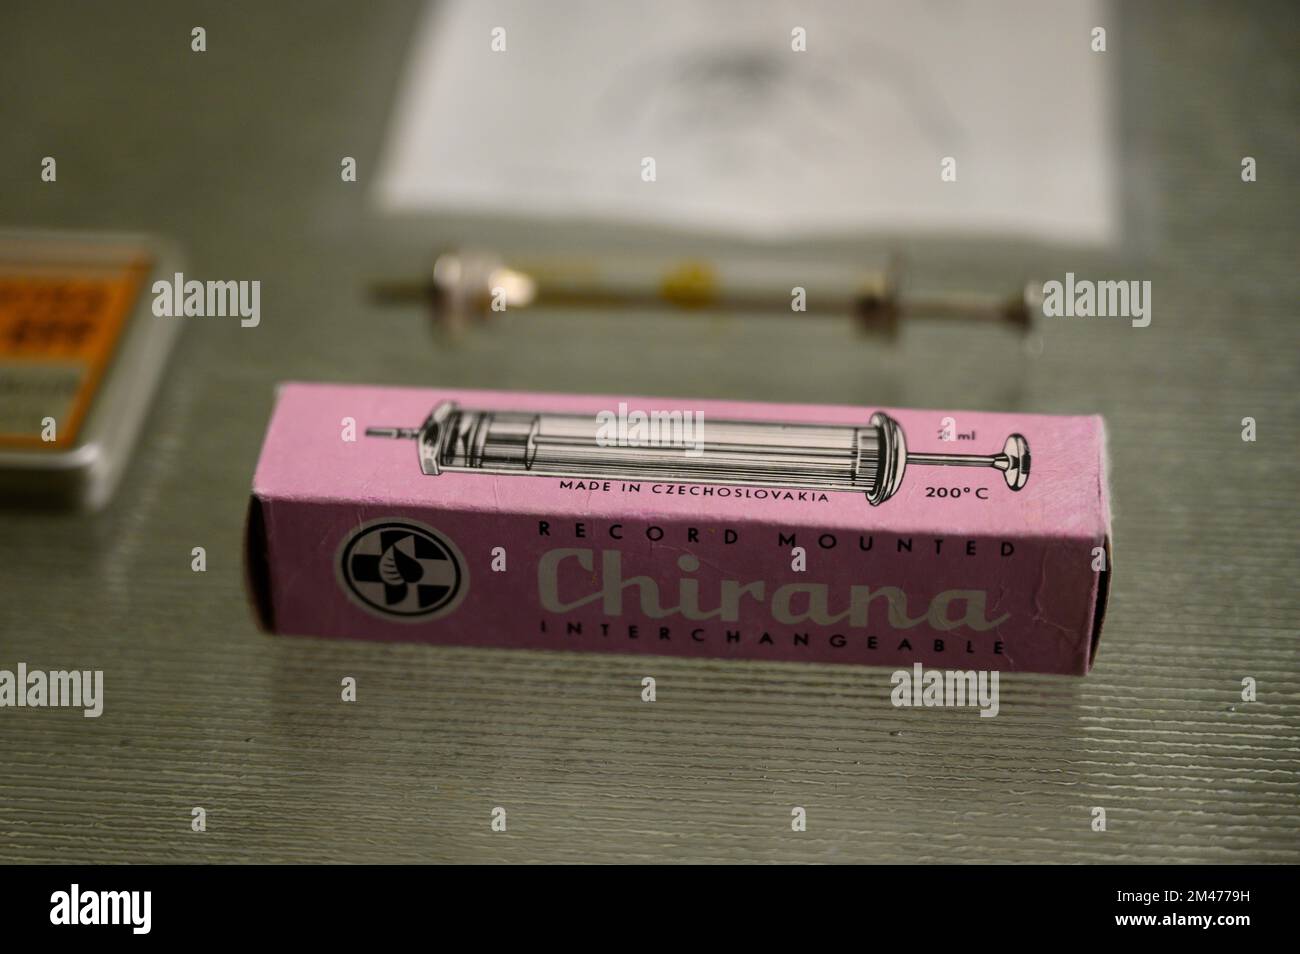 A historical reusable glass syringe from the Czechoslovak manufacturer Chirana. (Material: glass and surgical steel, made between 1935 and 1945). Stock Photo